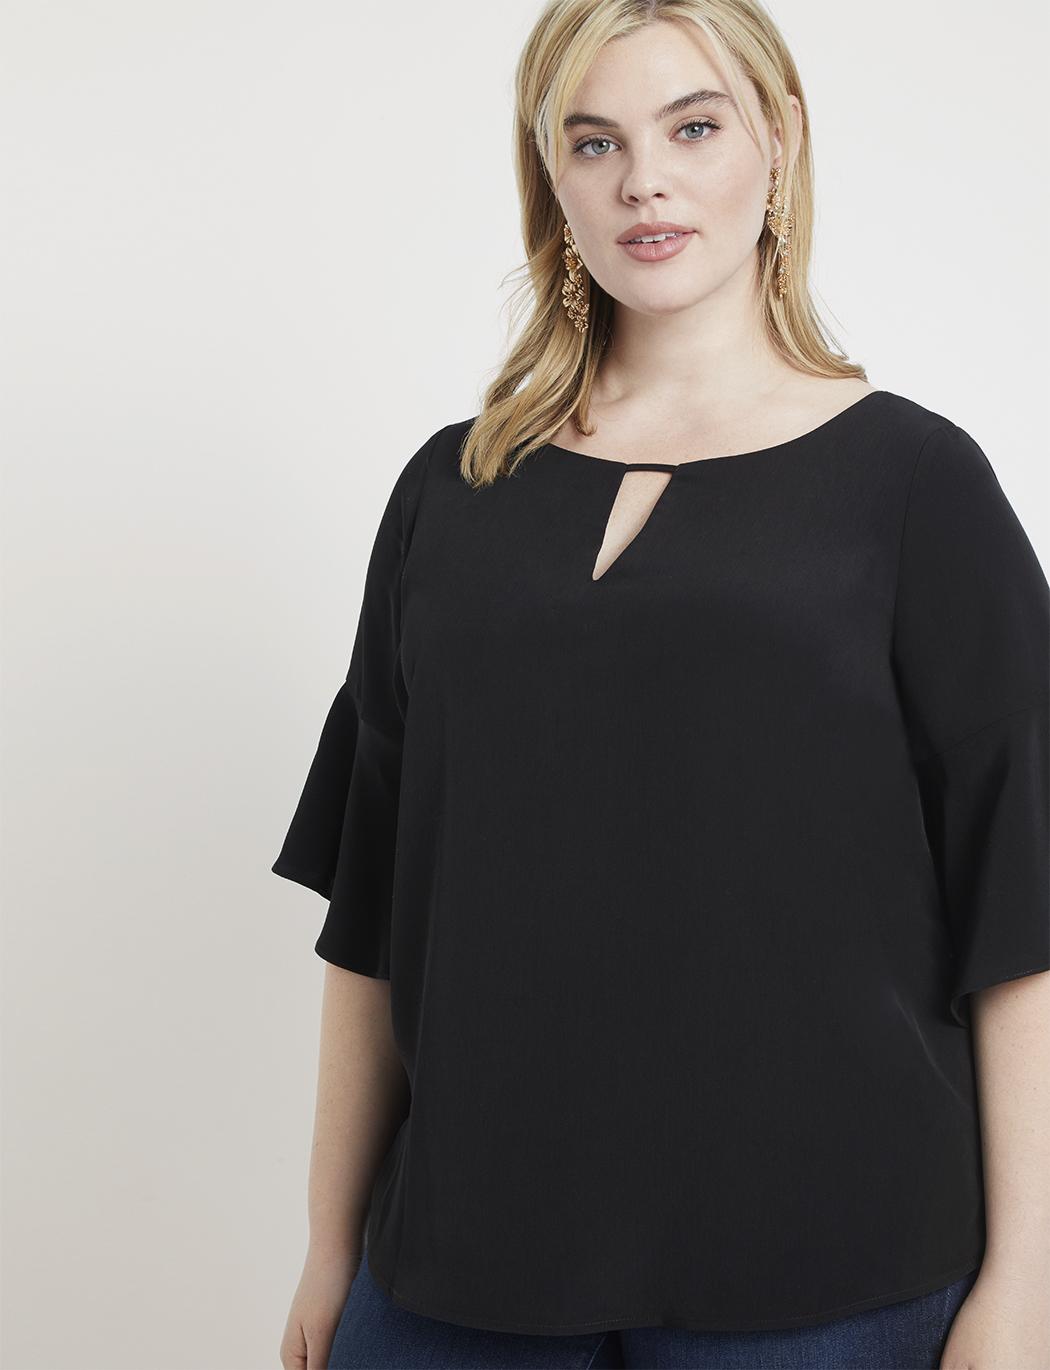 Eloquii Synthetic Flounce Sleeve Blouse in Black - Lyst